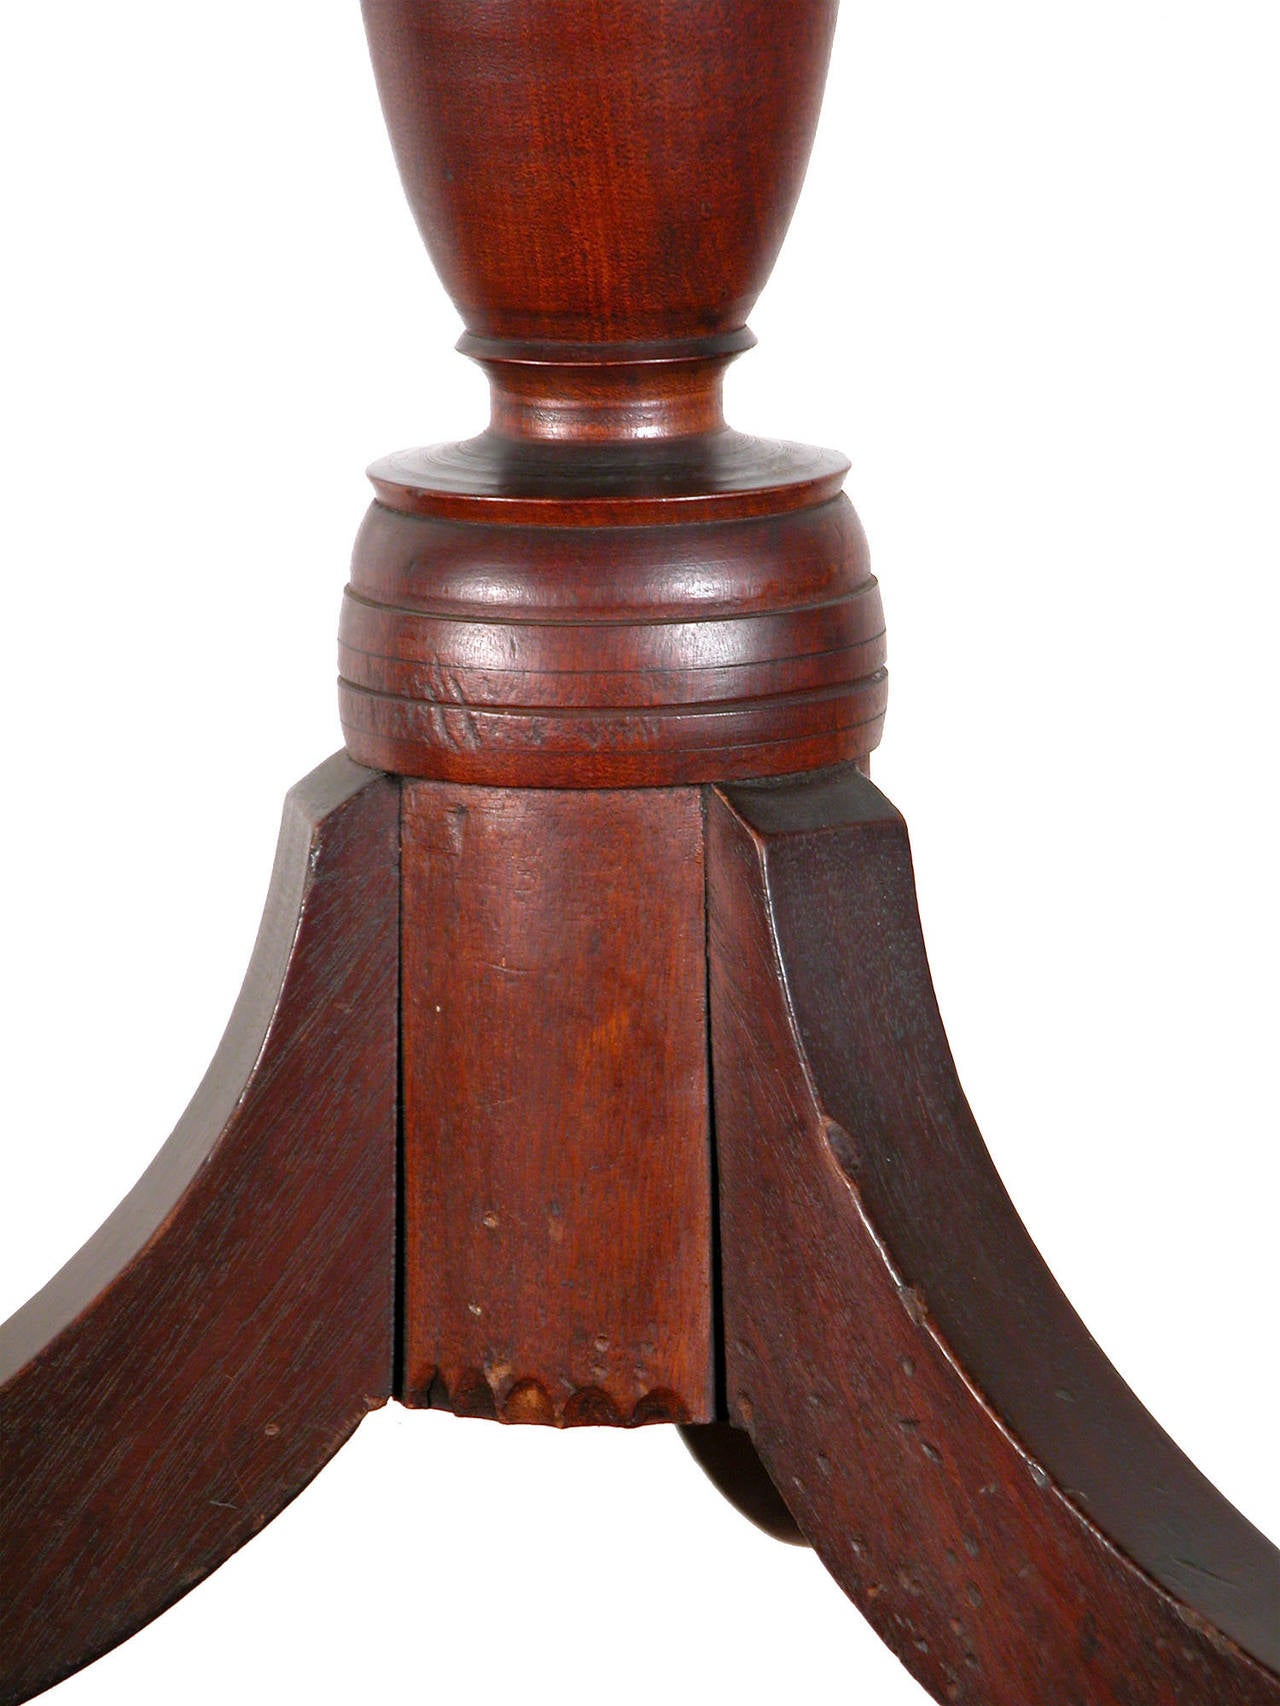 Small Inlaid Mahogany Tilt-Top Table, North Shore Massachusetts, circa 1810 In Excellent Condition For Sale In Providence, RI